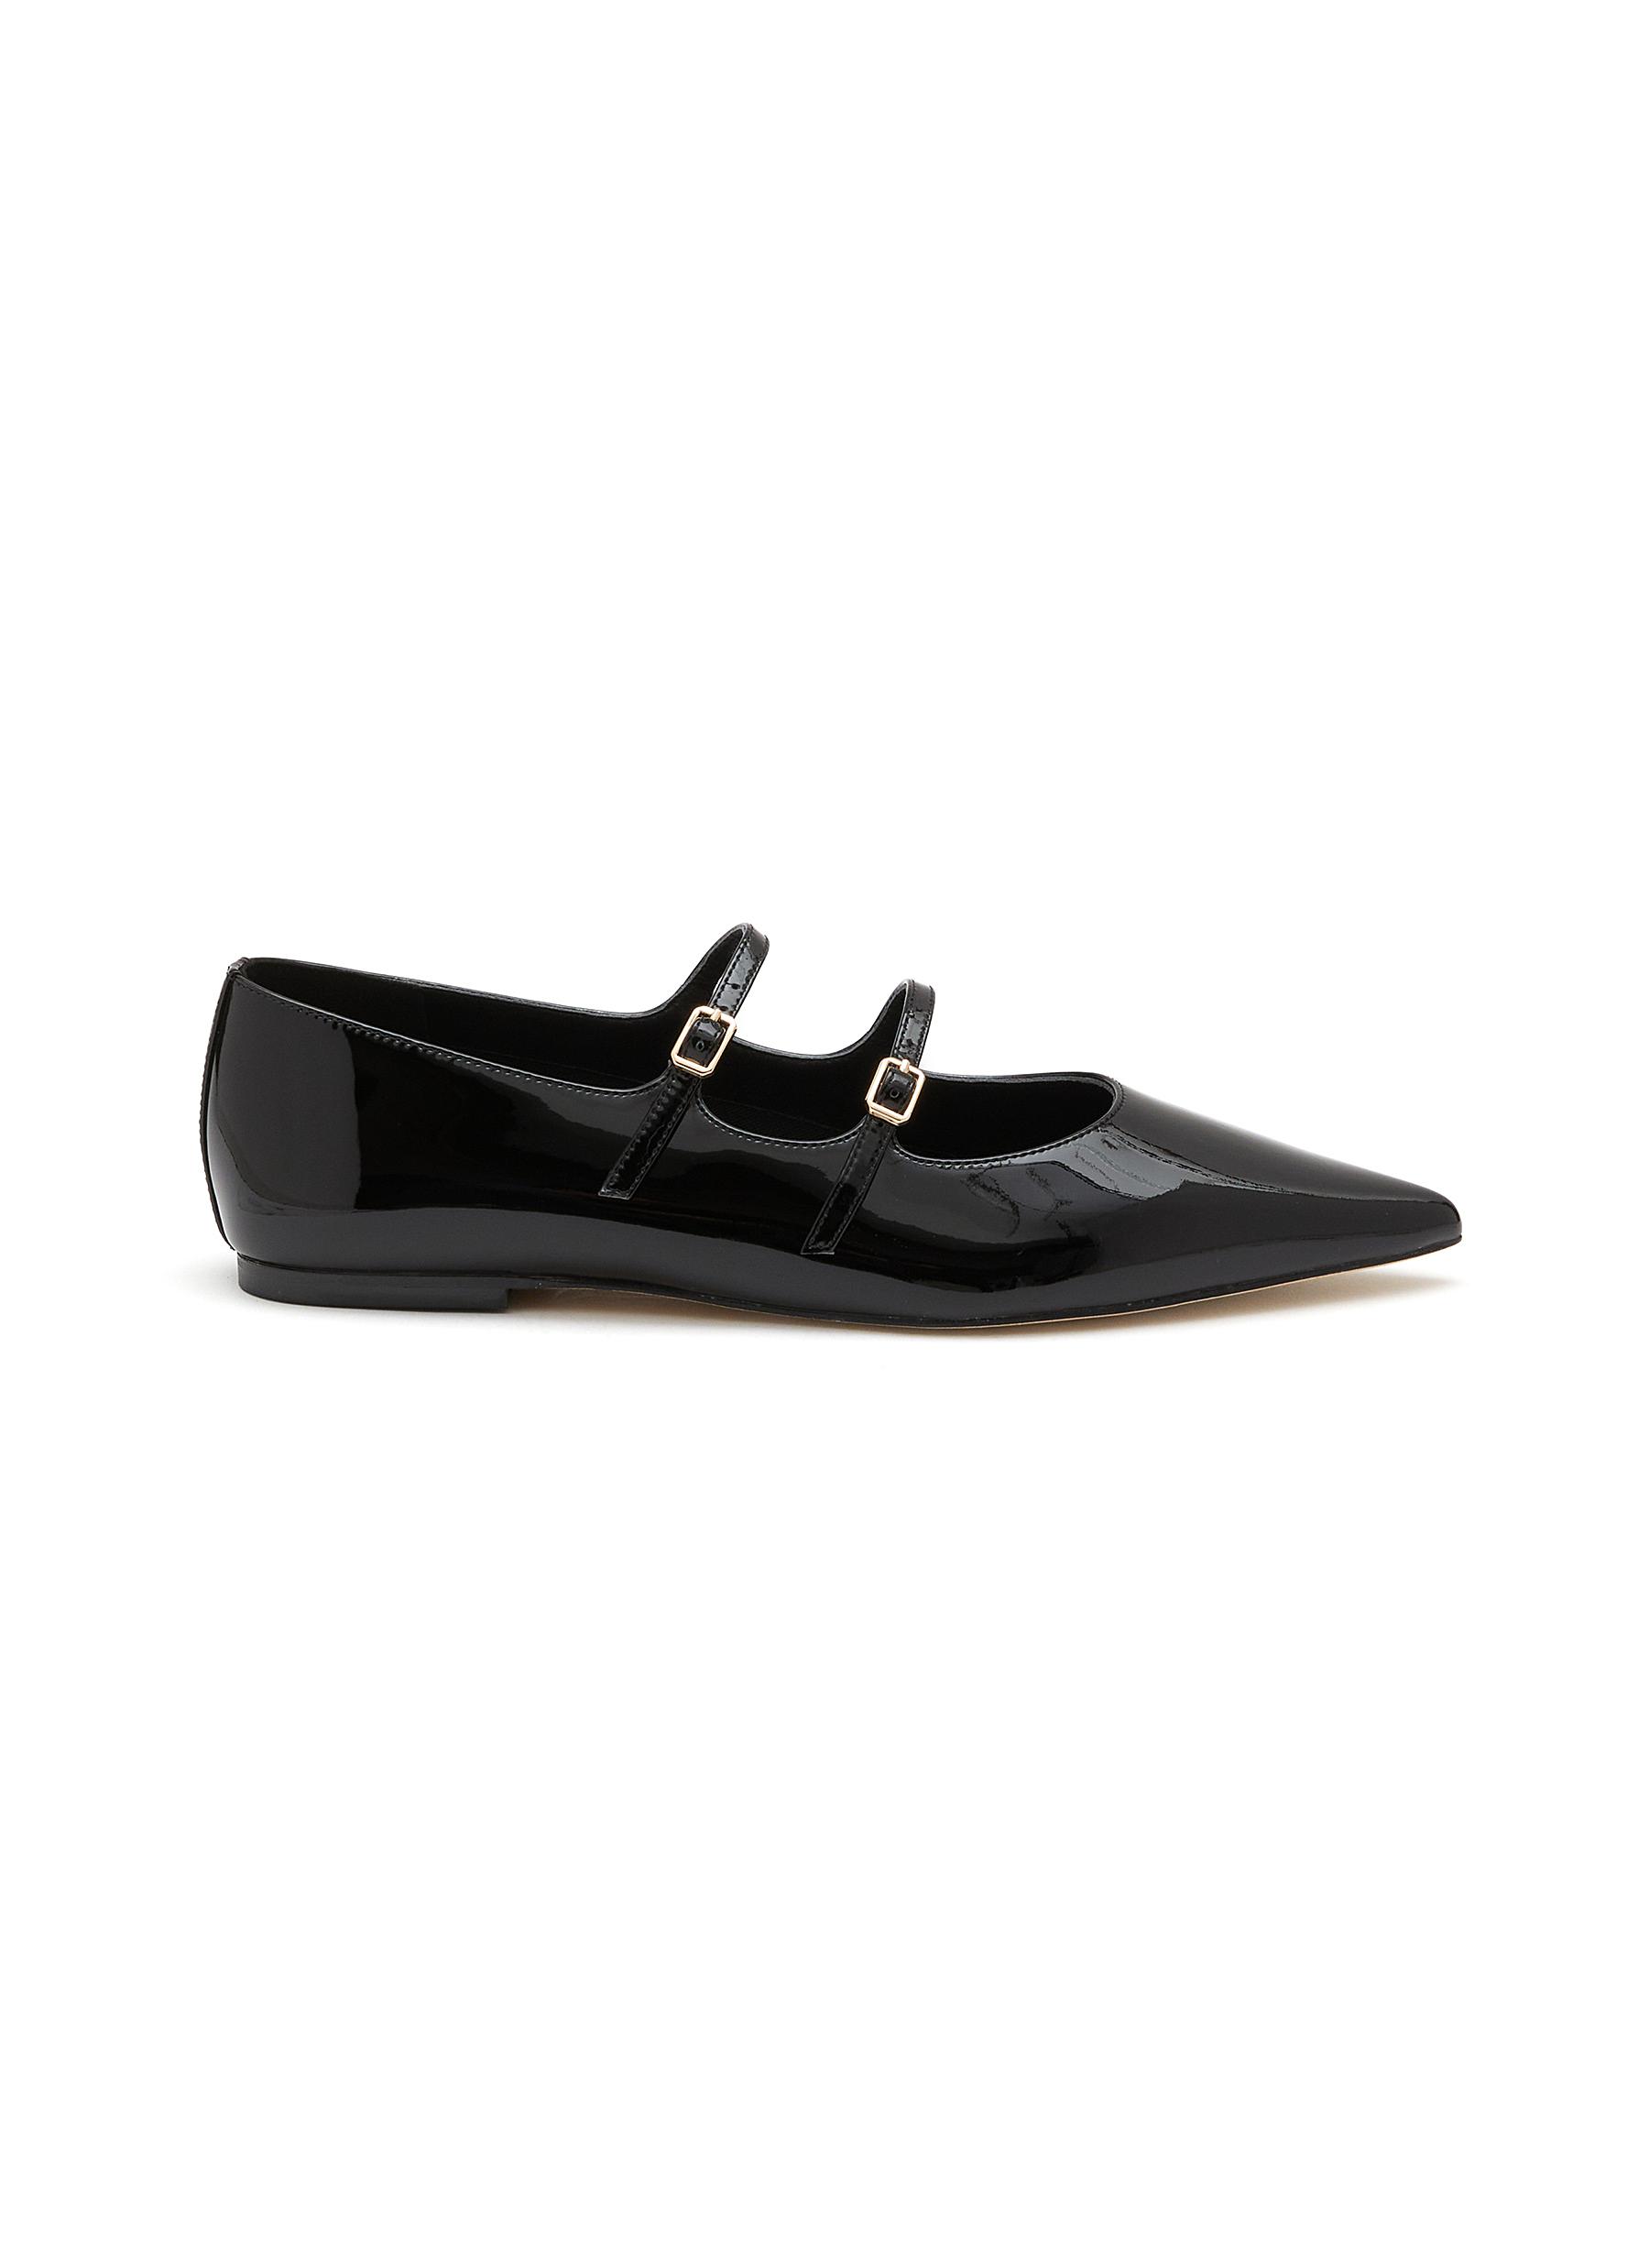 Jasmine Double Band Patent Leather Mary Janes